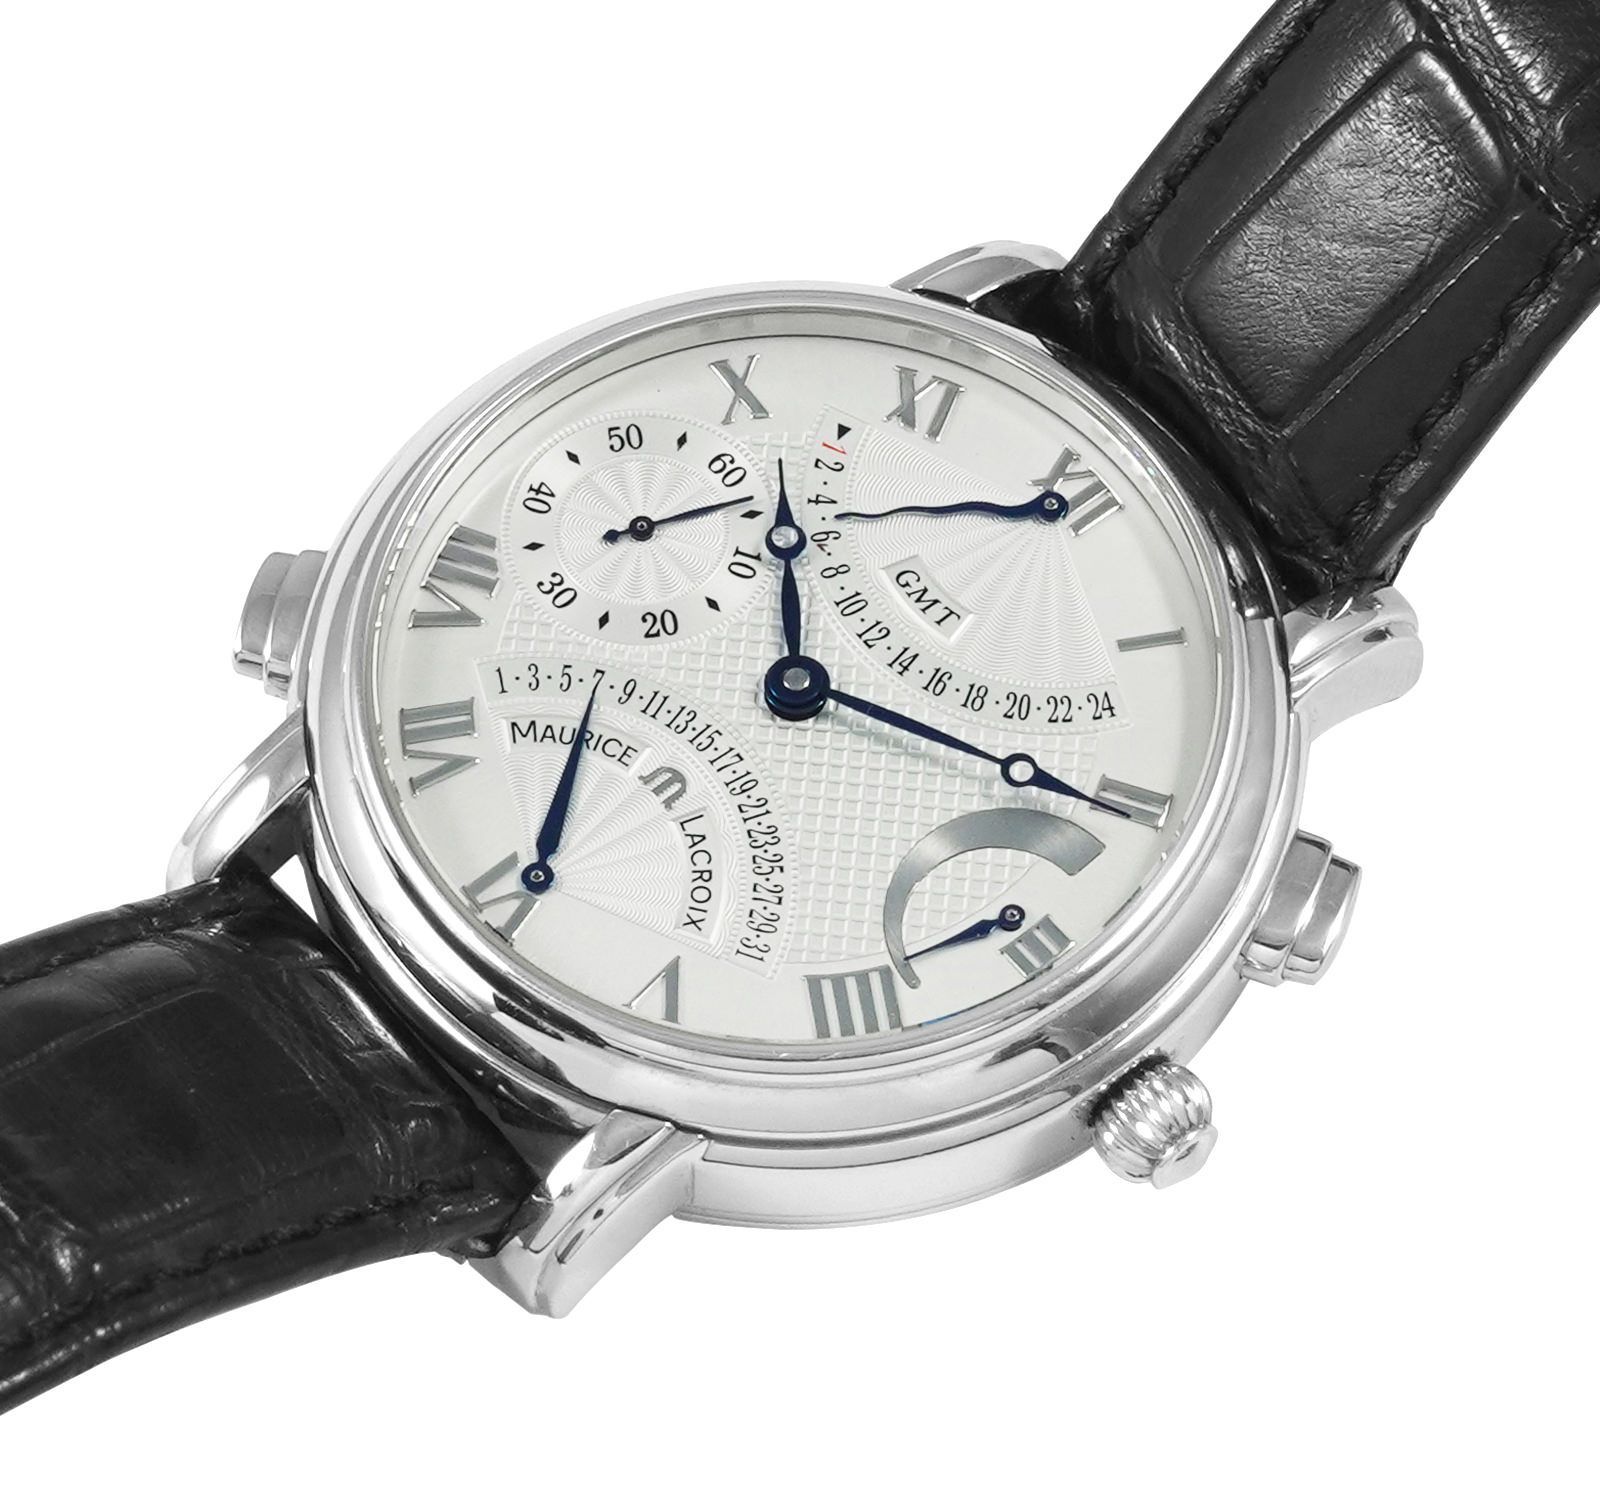 Maurice Lacroix watches for Men